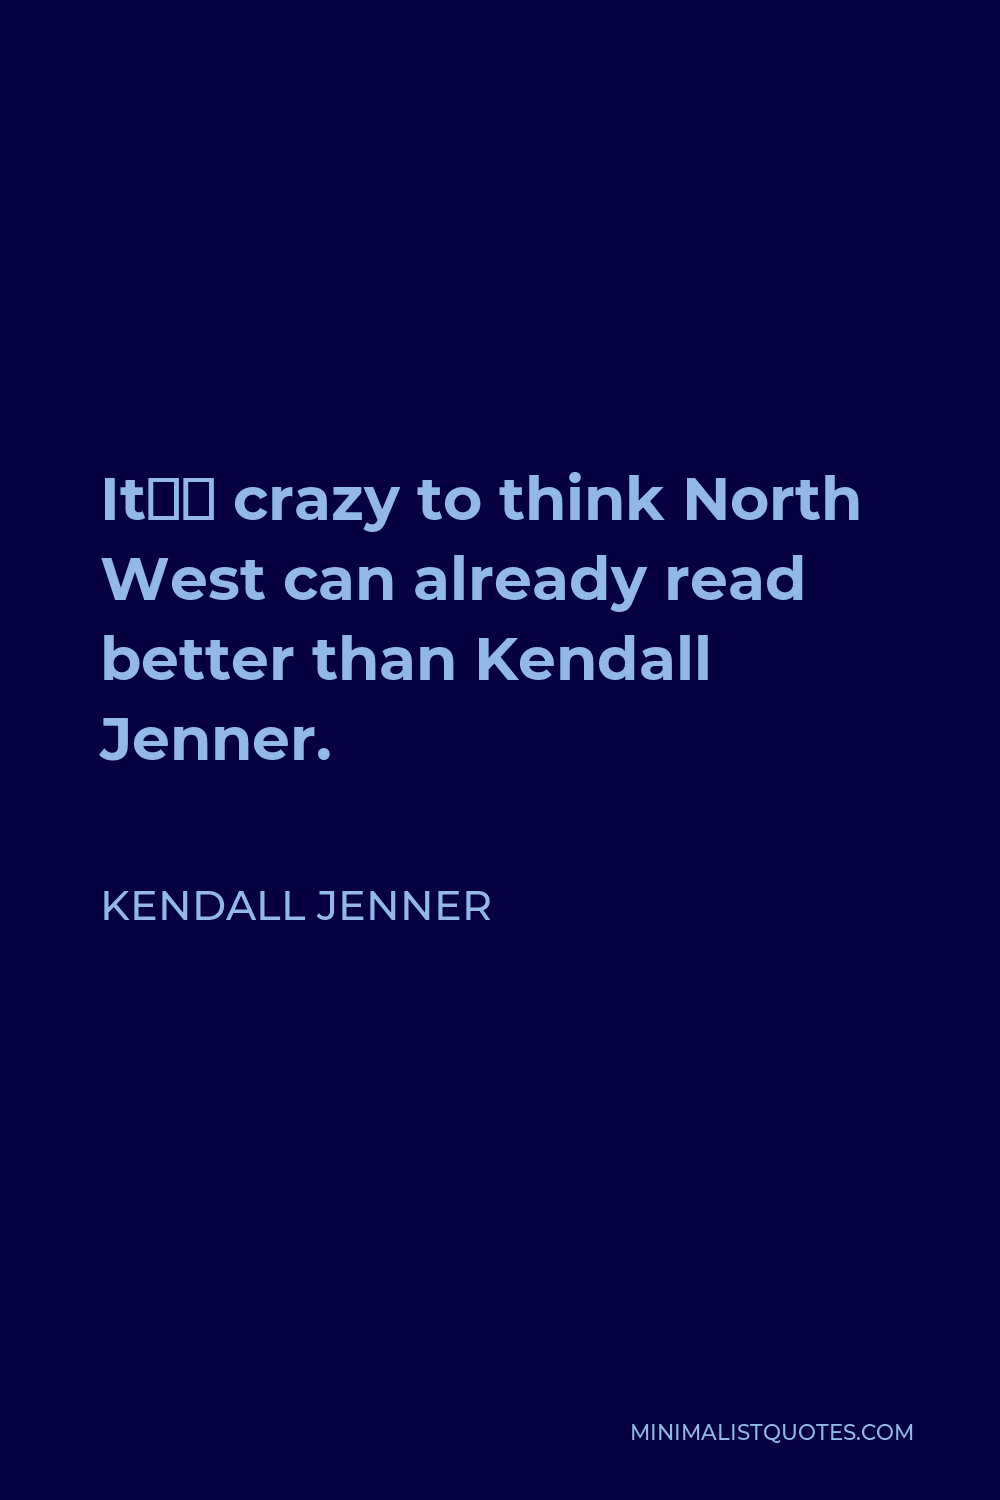 Kendall Jenner Quote - It’s crazy to think North West can already read better than Kendall Jenner.